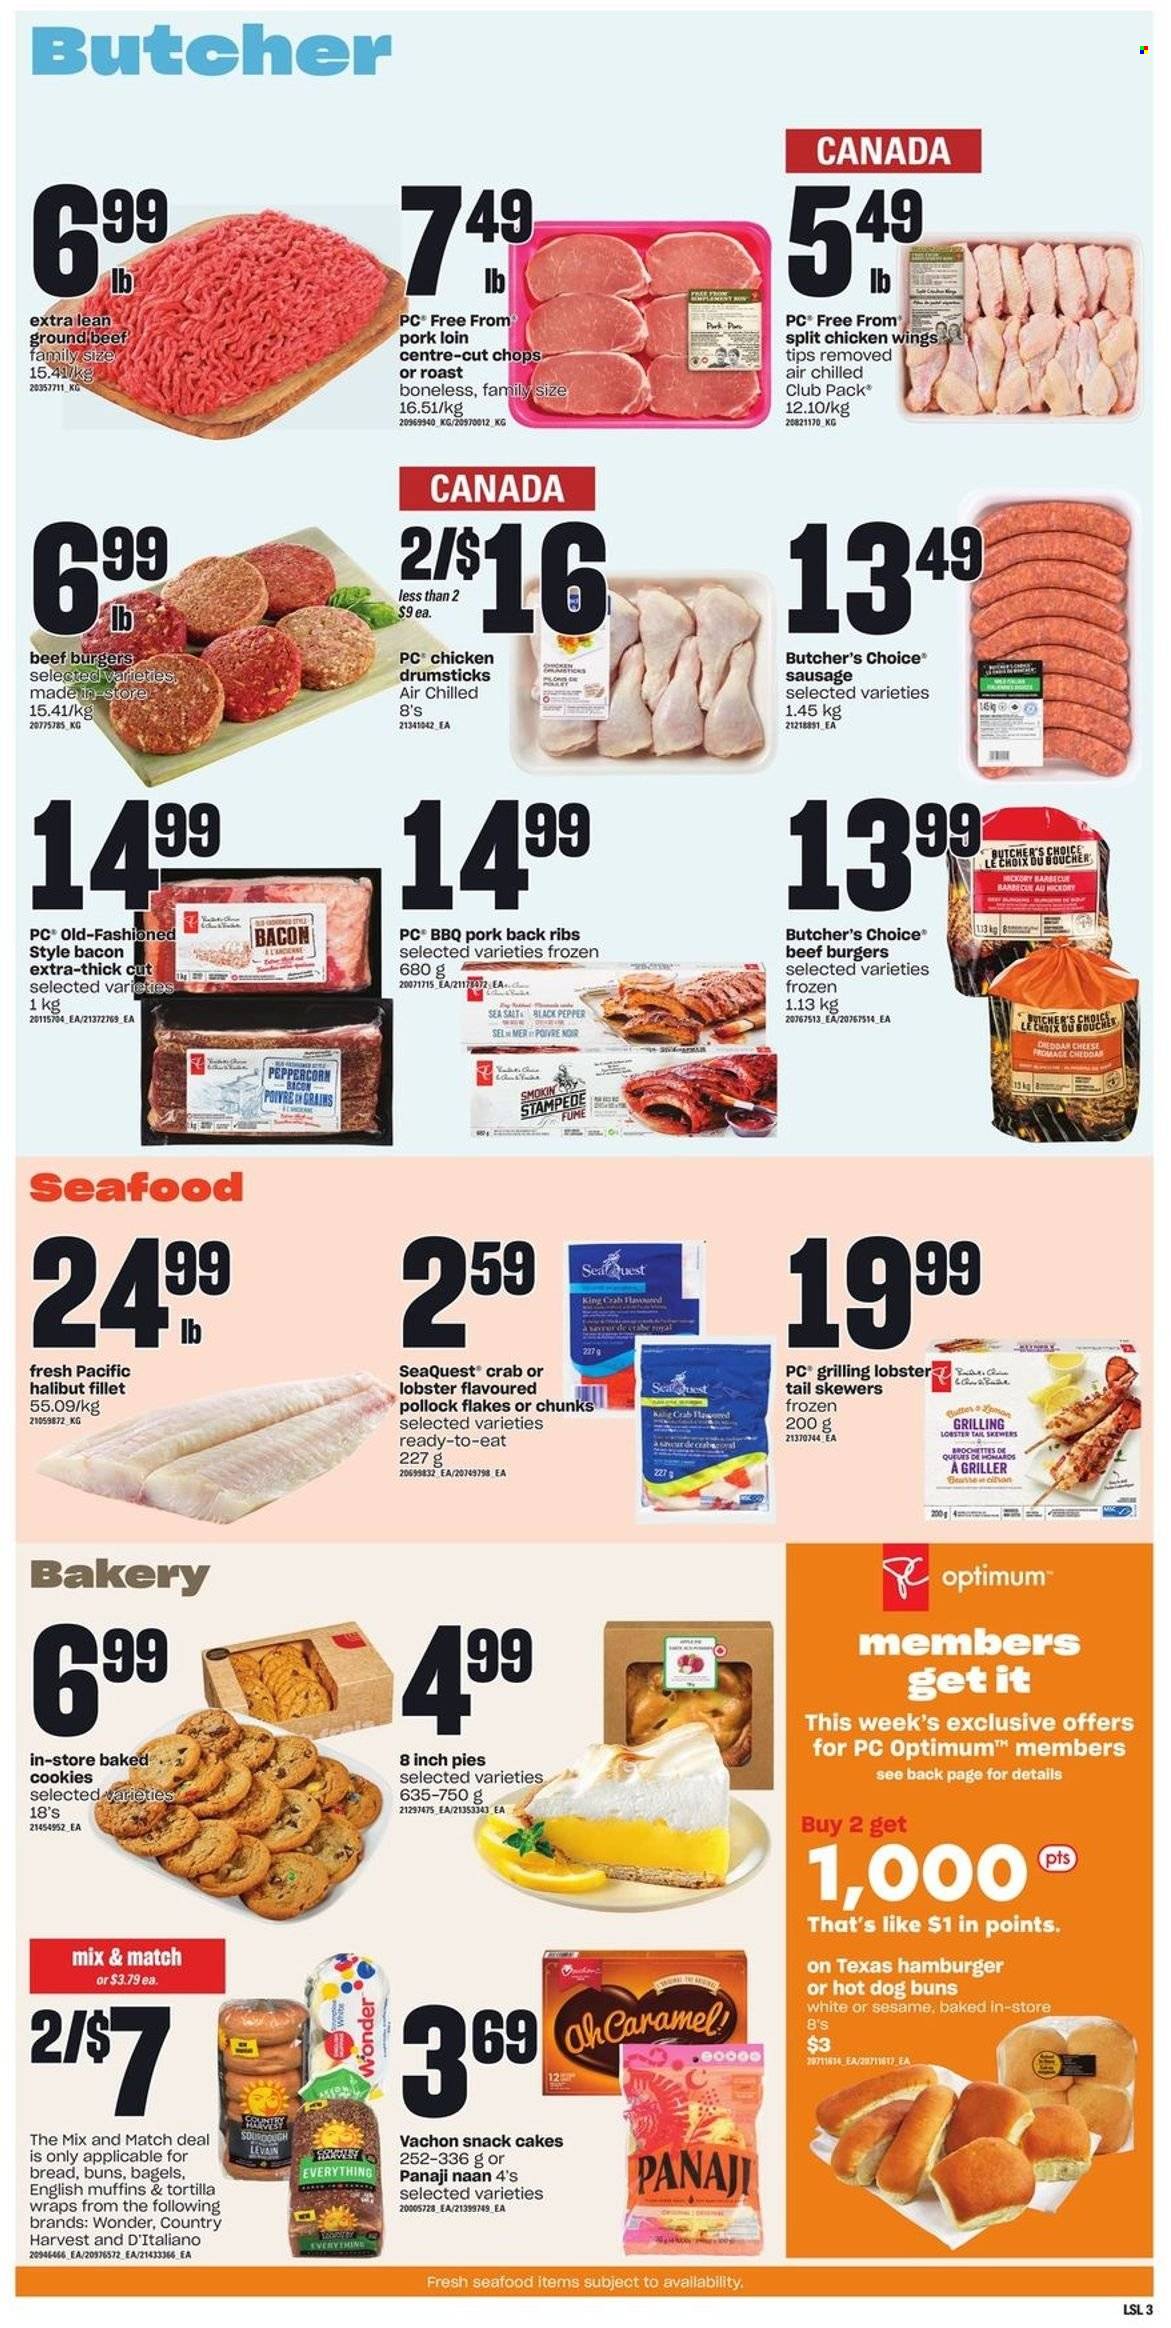 thumbnail - Loblaws Flyer - May 19, 2022 - May 25, 2022 - Sales products - bagels, english muffins, tortillas, cake, buns, wraps, lobster, halibut, pollock, seafood, crab, lobster tail, beef burger, bacon, sausage, cheddar, cheese, Country Harvest, chicken wings, cookies, snack, sea salt, black pepper, chicken drumsticks, chicken, beef meat, ground beef, pork loin, pork meat, pork ribs, pork back ribs, Optimum. Page 4.